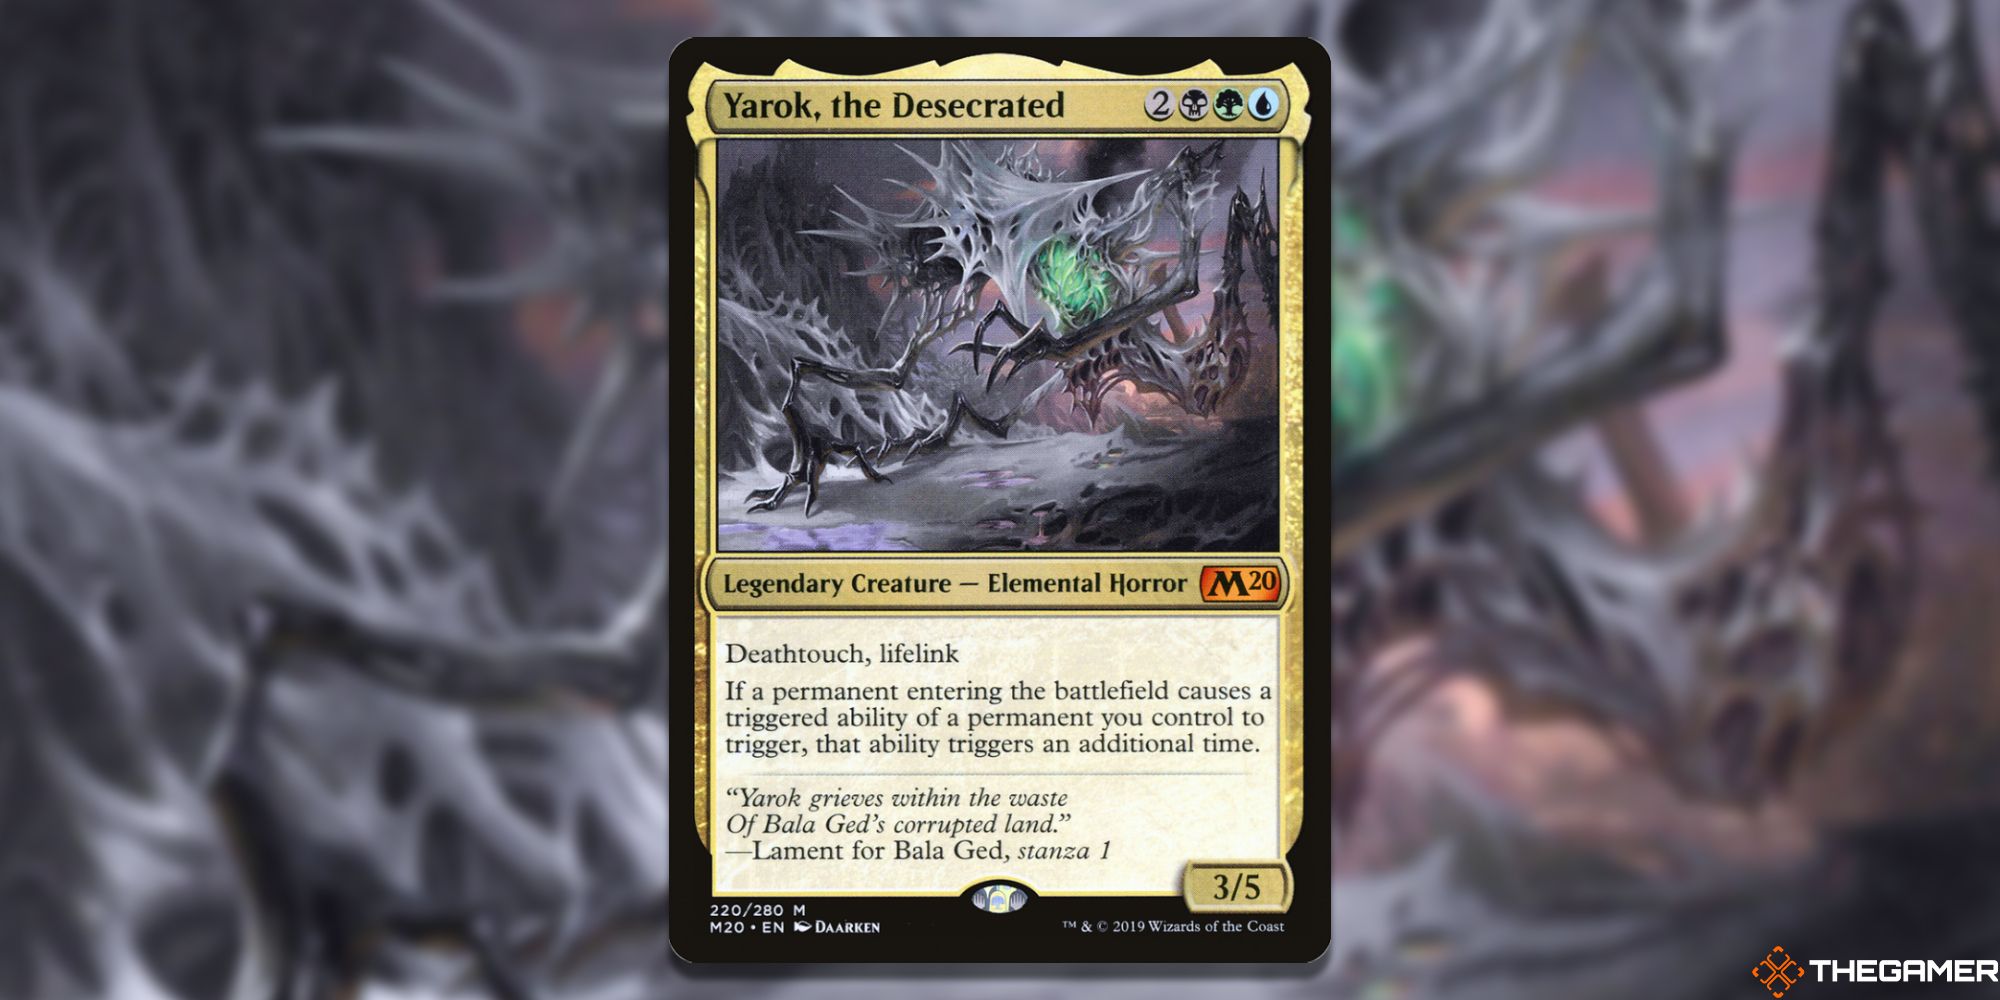 Image of the Yarok the Desocrated card in Magic: The Gathering, with art by Daarken